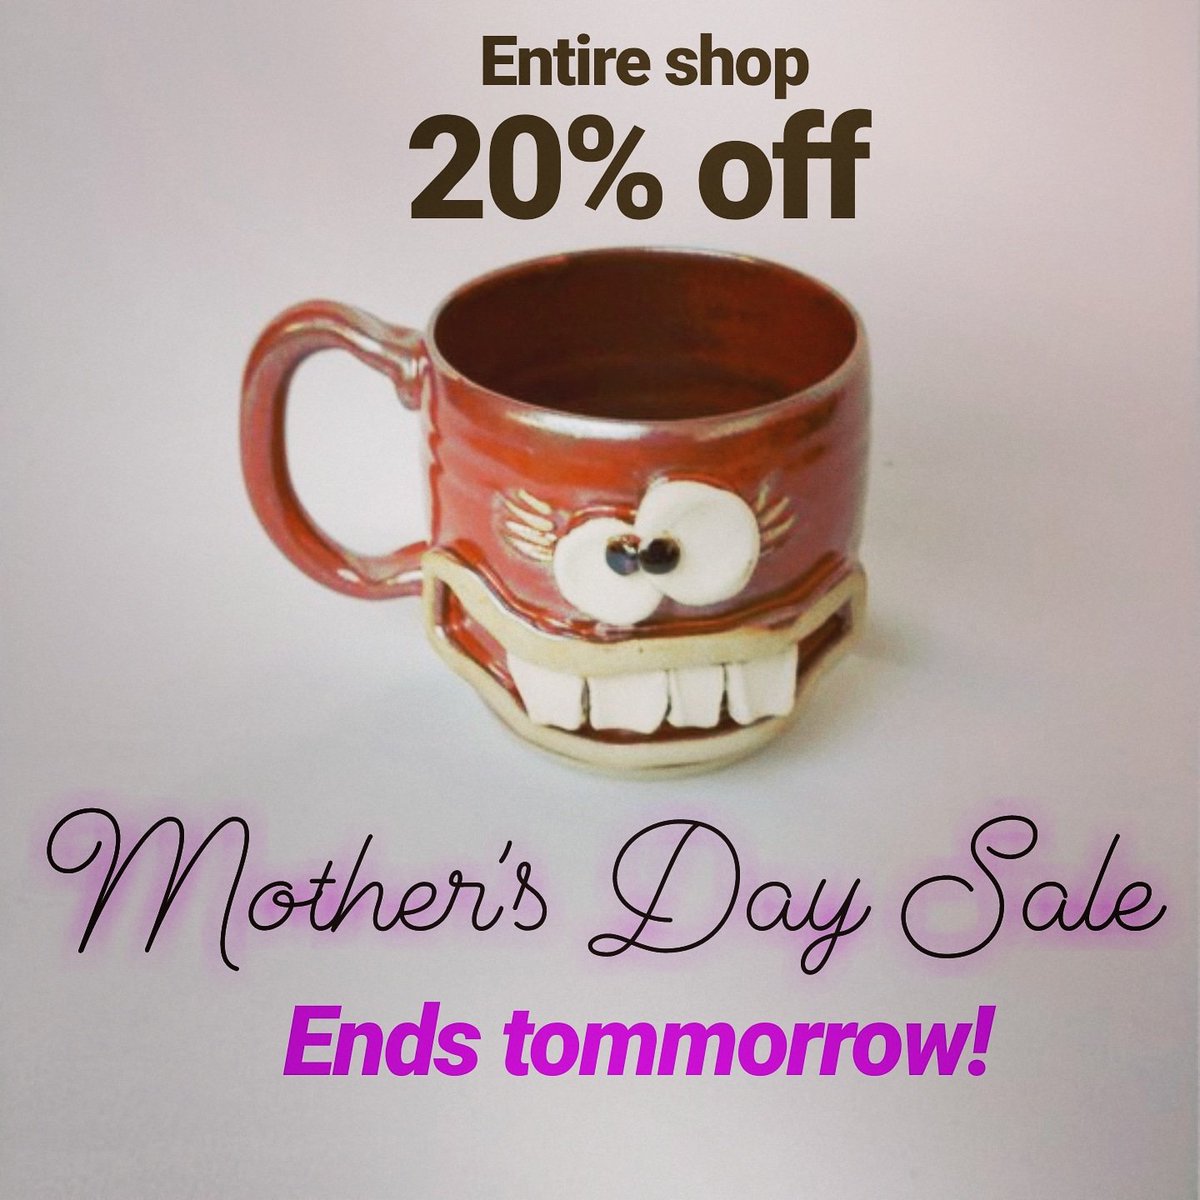 Hey guys! It's FRIDAY! Yes! Don't forget to check out our #mothersdaysale over on Etsy! The entire shop is 20% off through midnight tomorrow! Cheers to the weekend!

nelsonstudiopottery #ugchugmug #ceramics #pottery #stonewarepottery #facemugs #makersmovement #potterylovers #sale